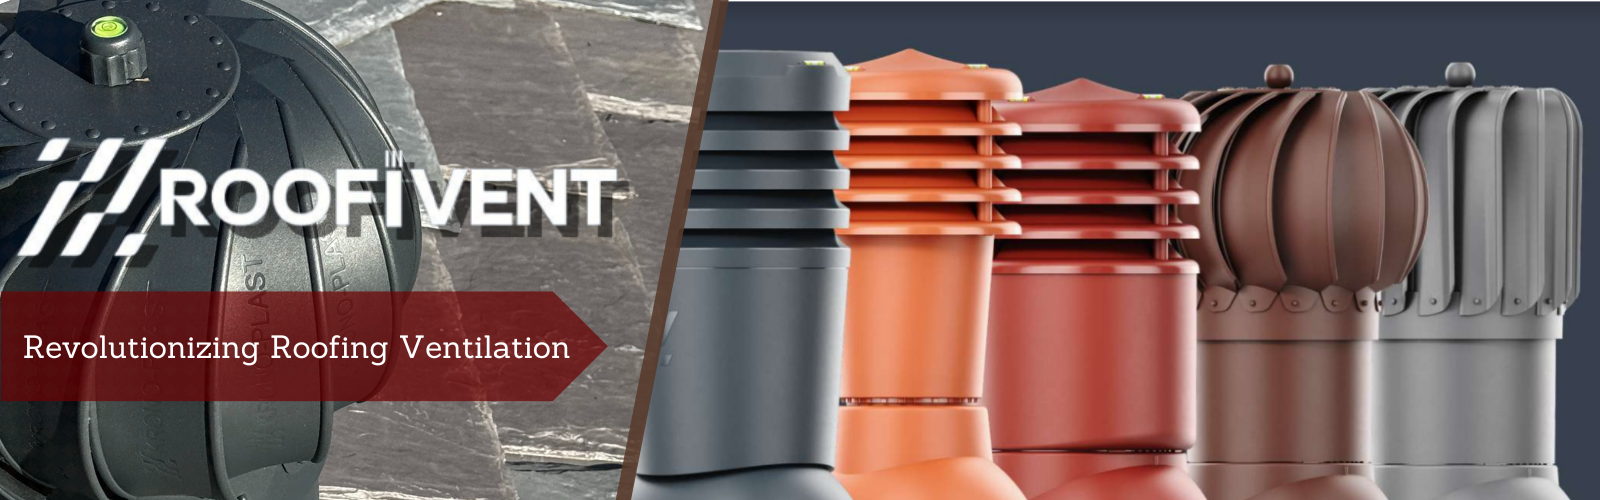 Roofivent: The Newest in Roofing Ventilation